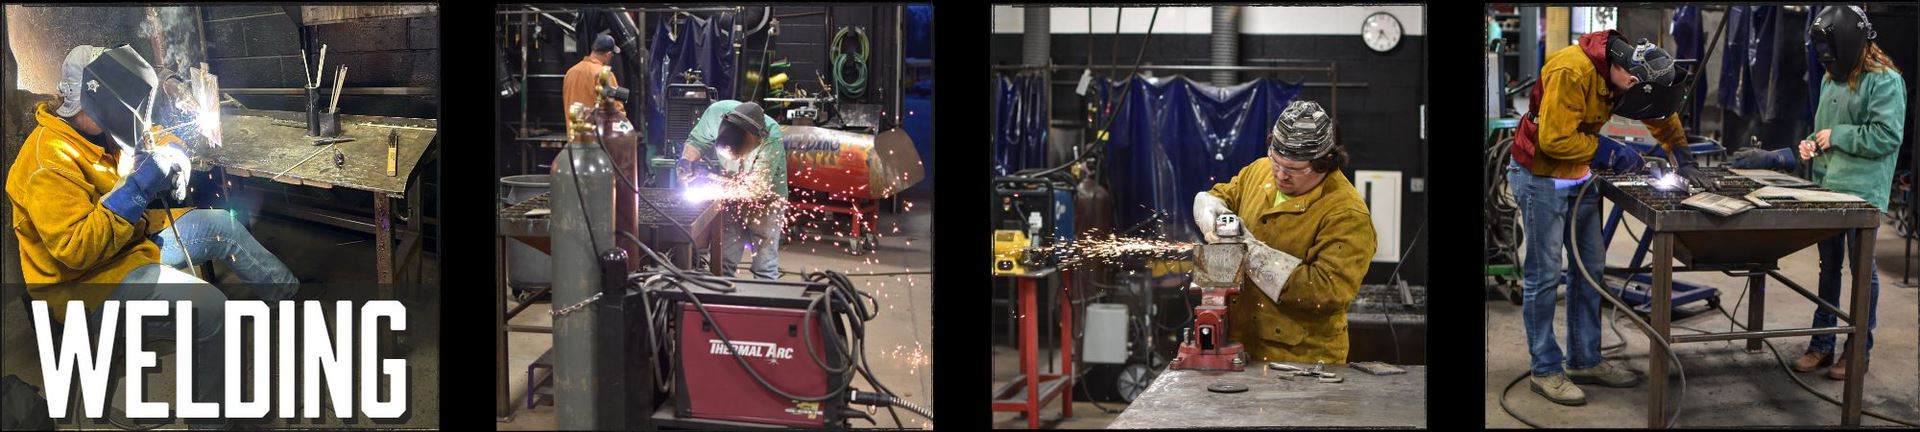 pickaway ross career and technology center adult education: your ohio technical center: welding